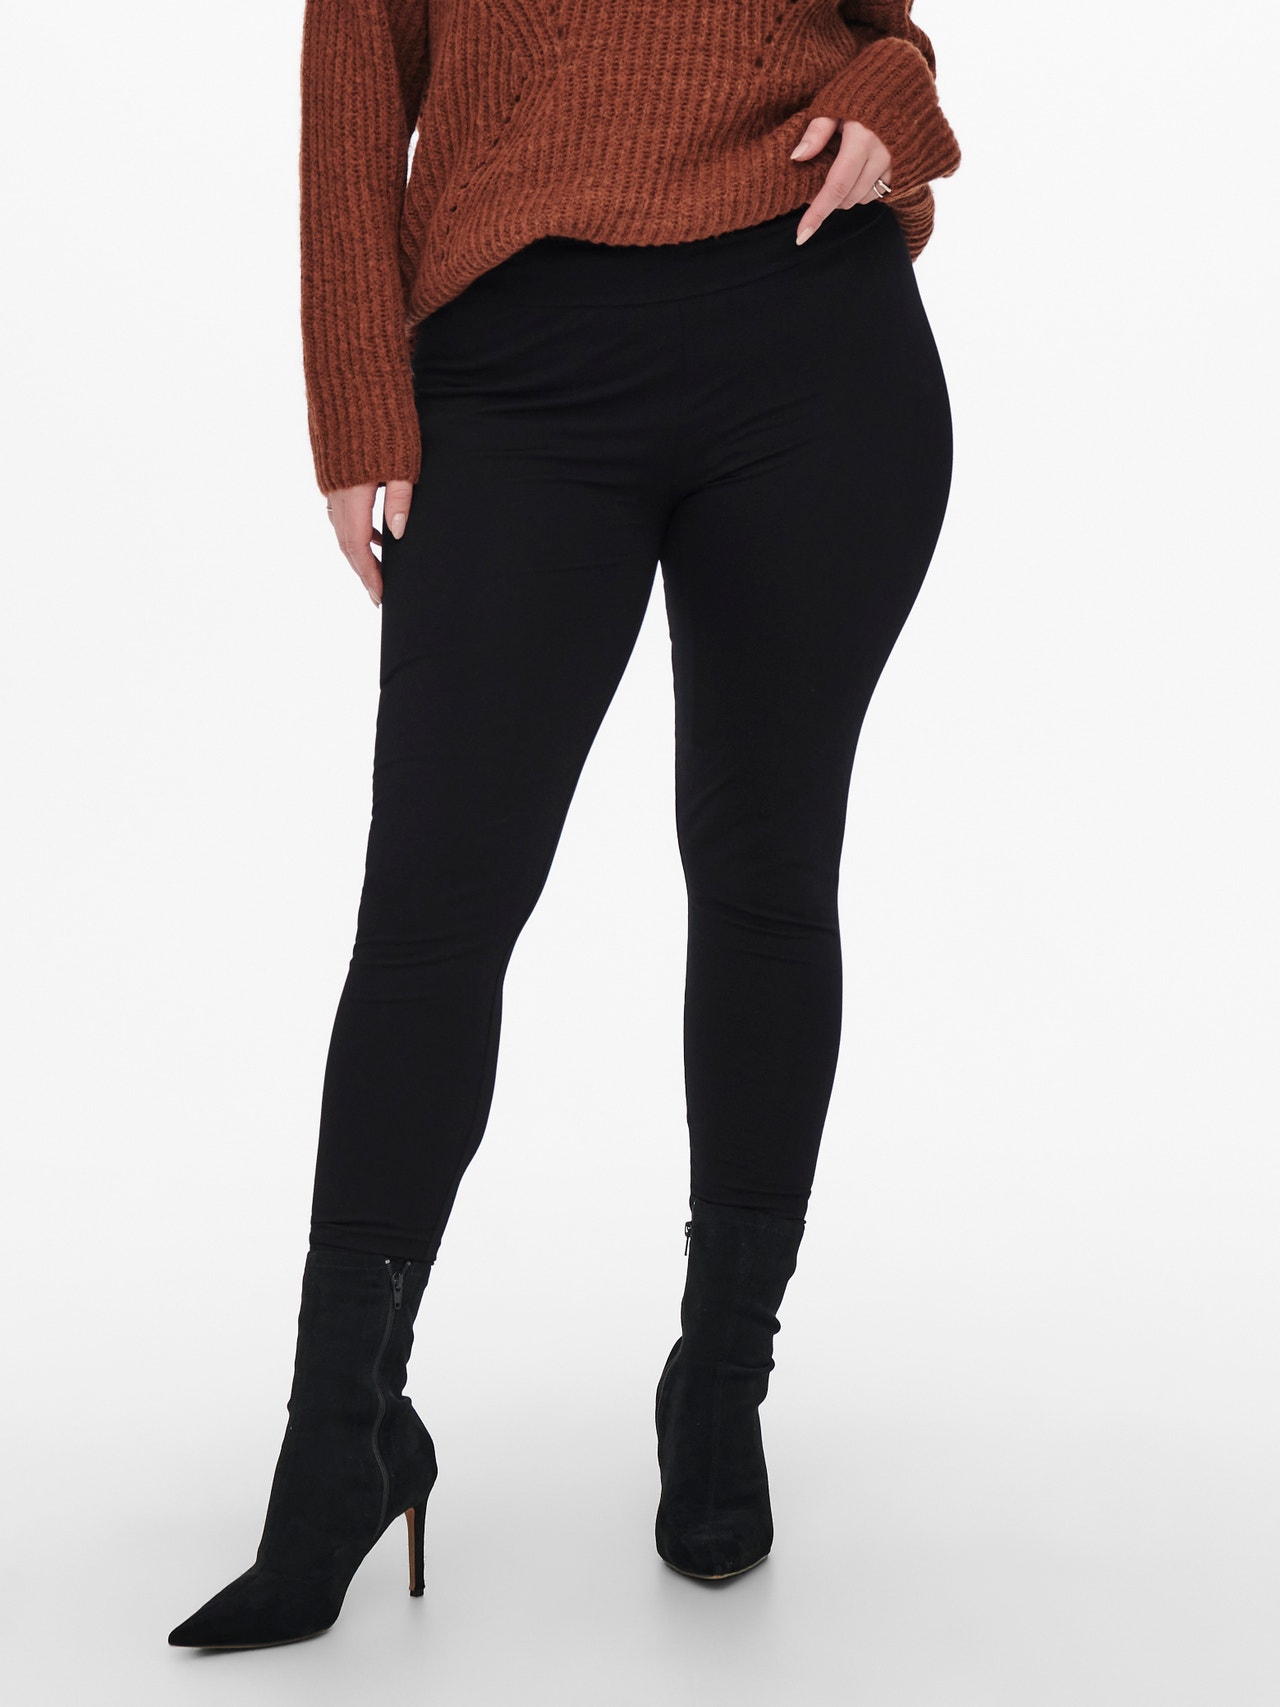 Curvy solid colored Leggings | Black ONLY® 